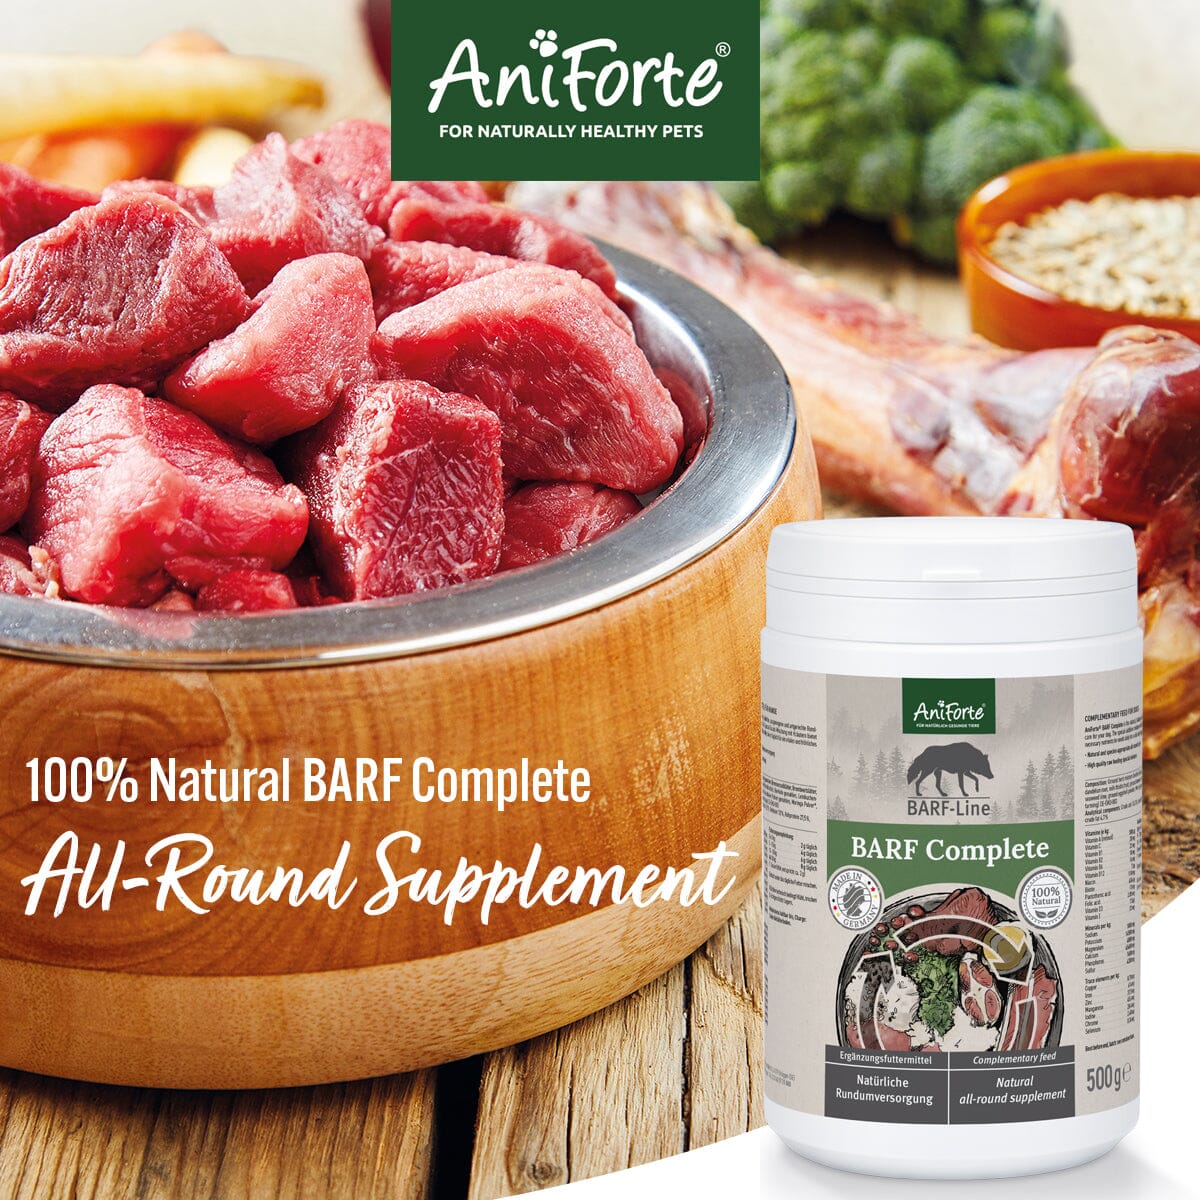 Raw Feeders Essentials - BARF Complete and Fruit and Vegetables with Herbs - AniForte UK